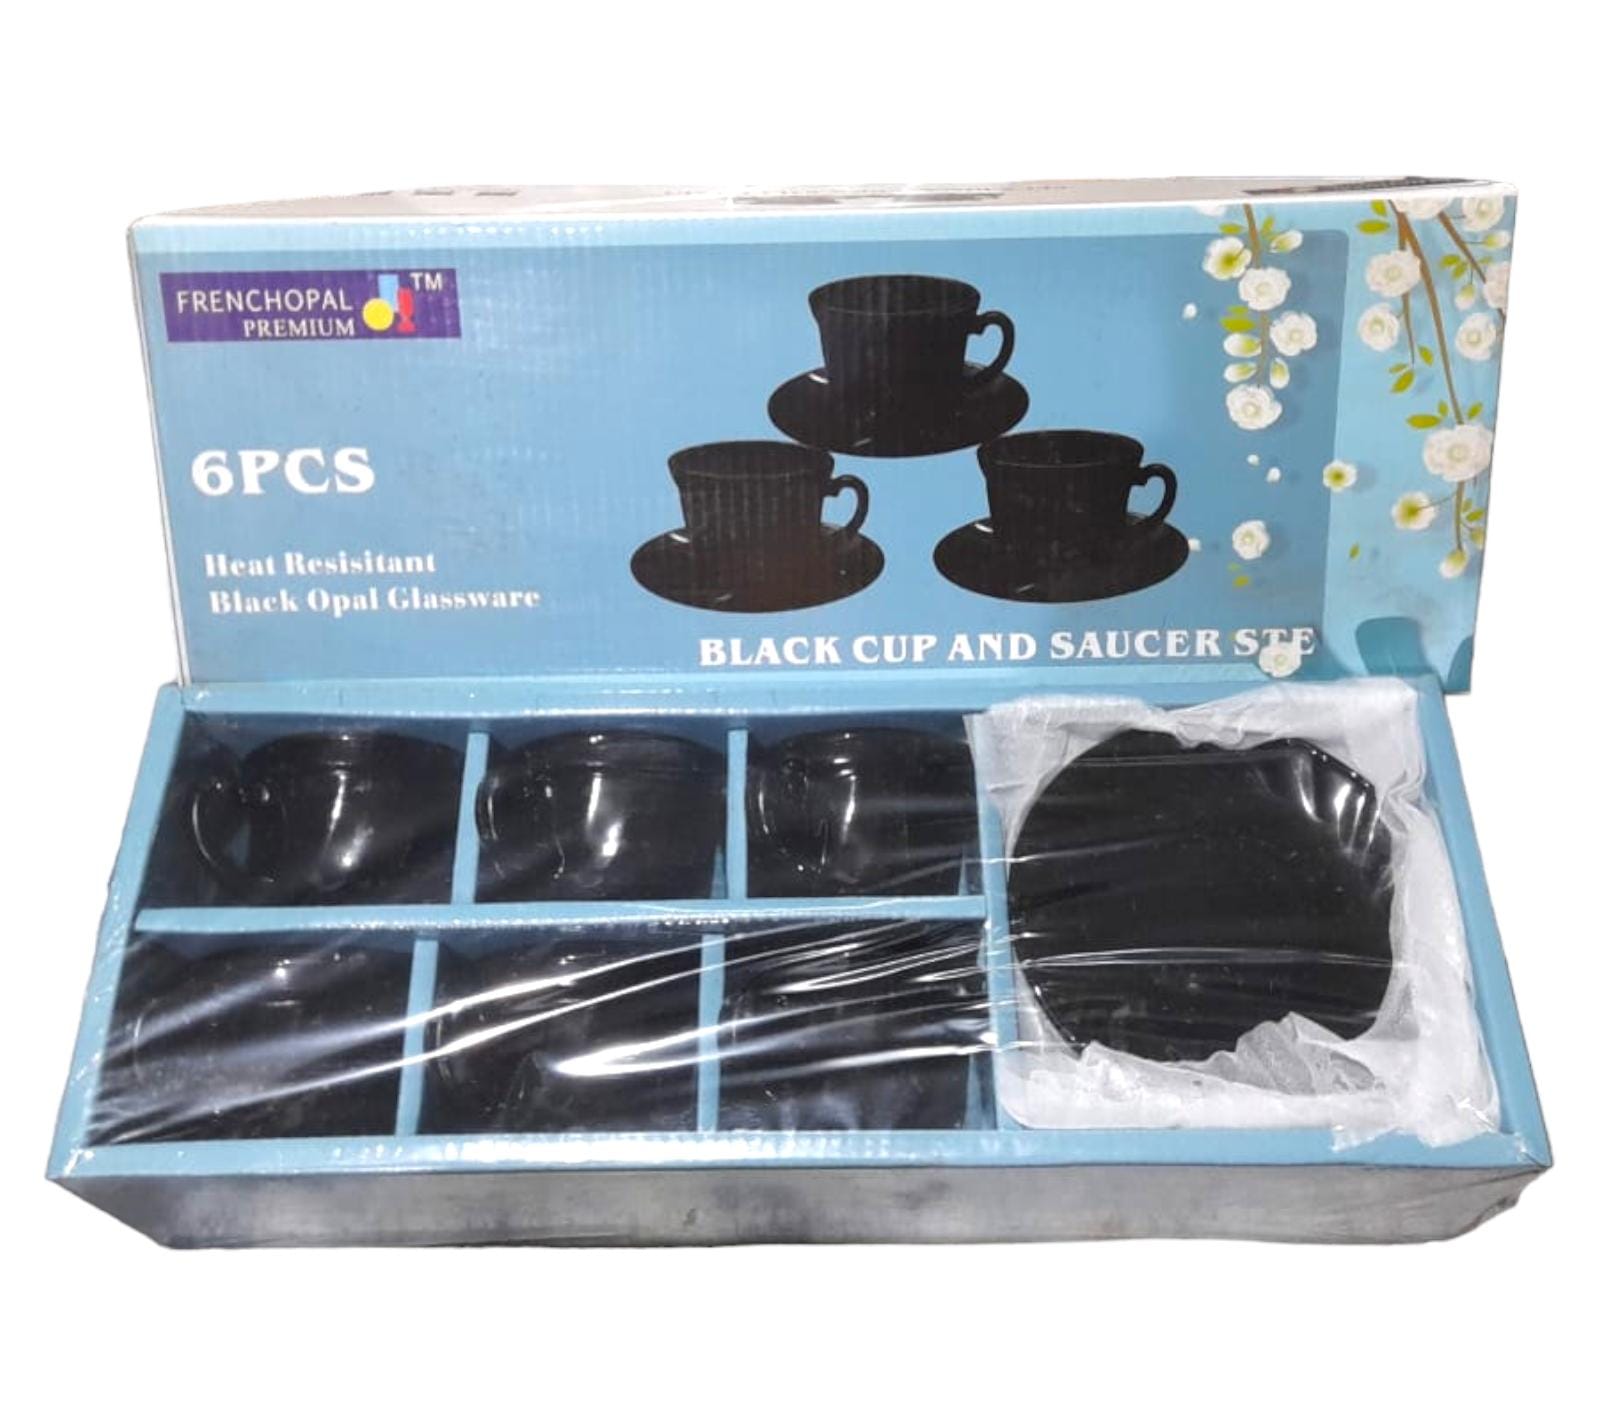 Black Cup And Saucer Ste